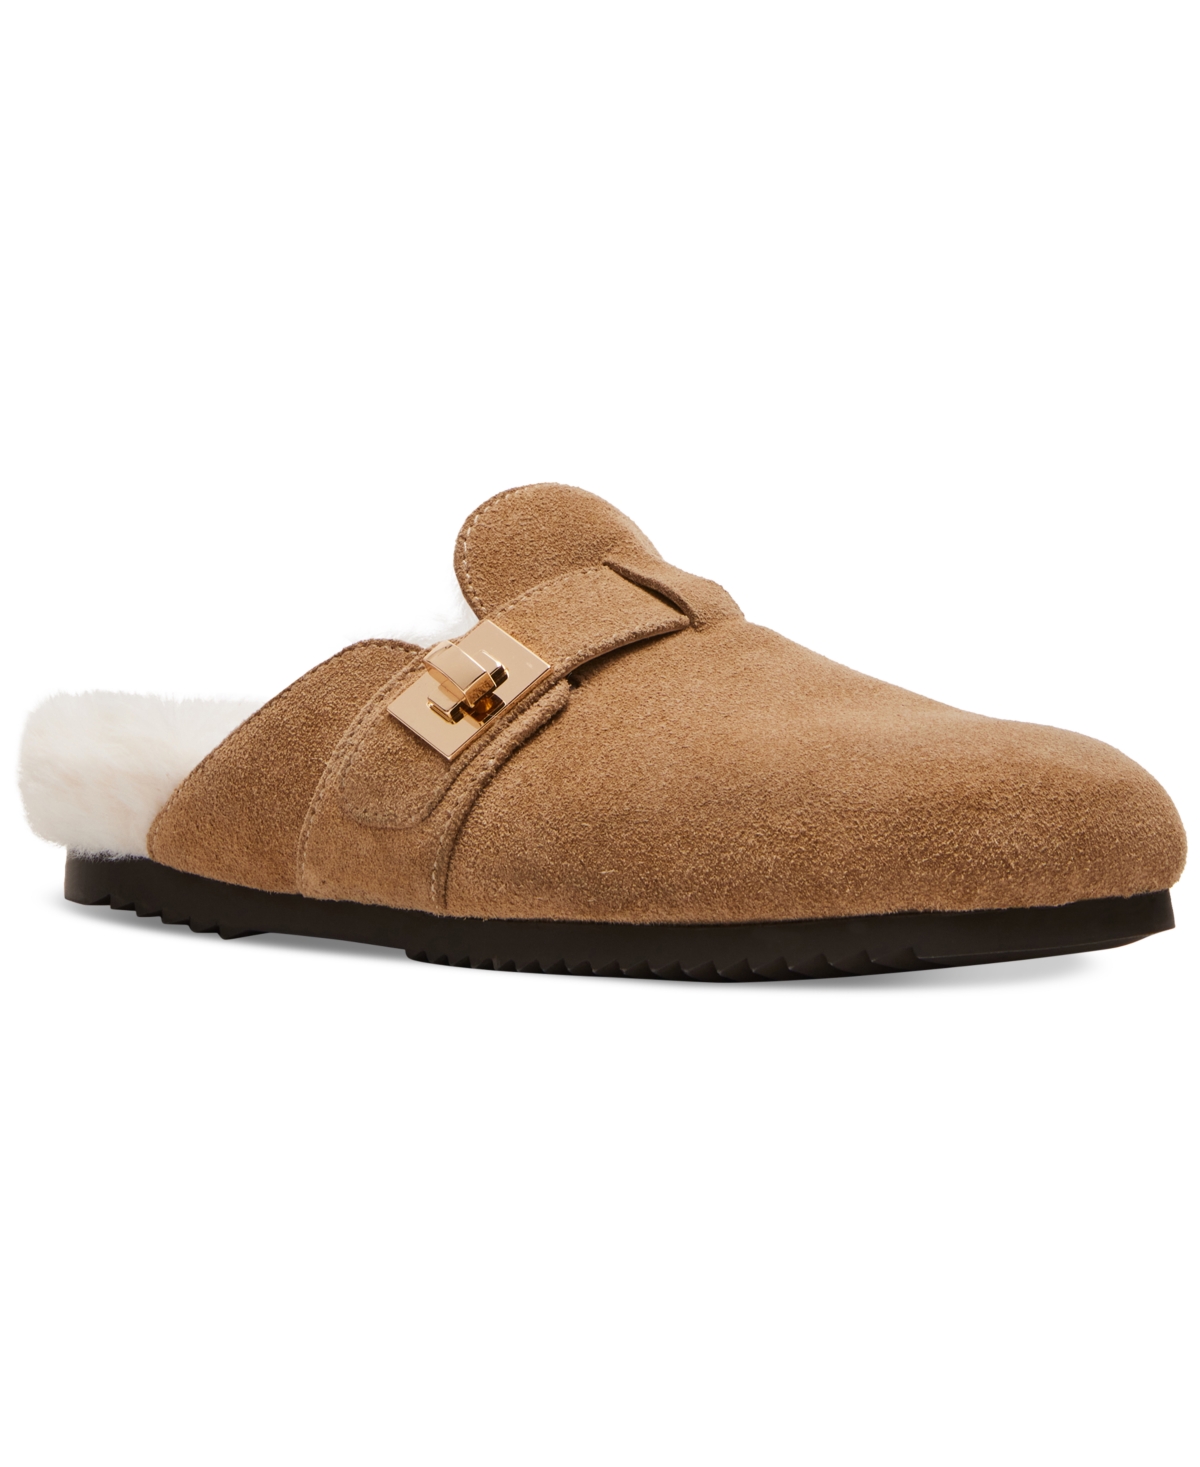 Women's Money-f Faux-Fur Slip On Clogs - Taupe Suede